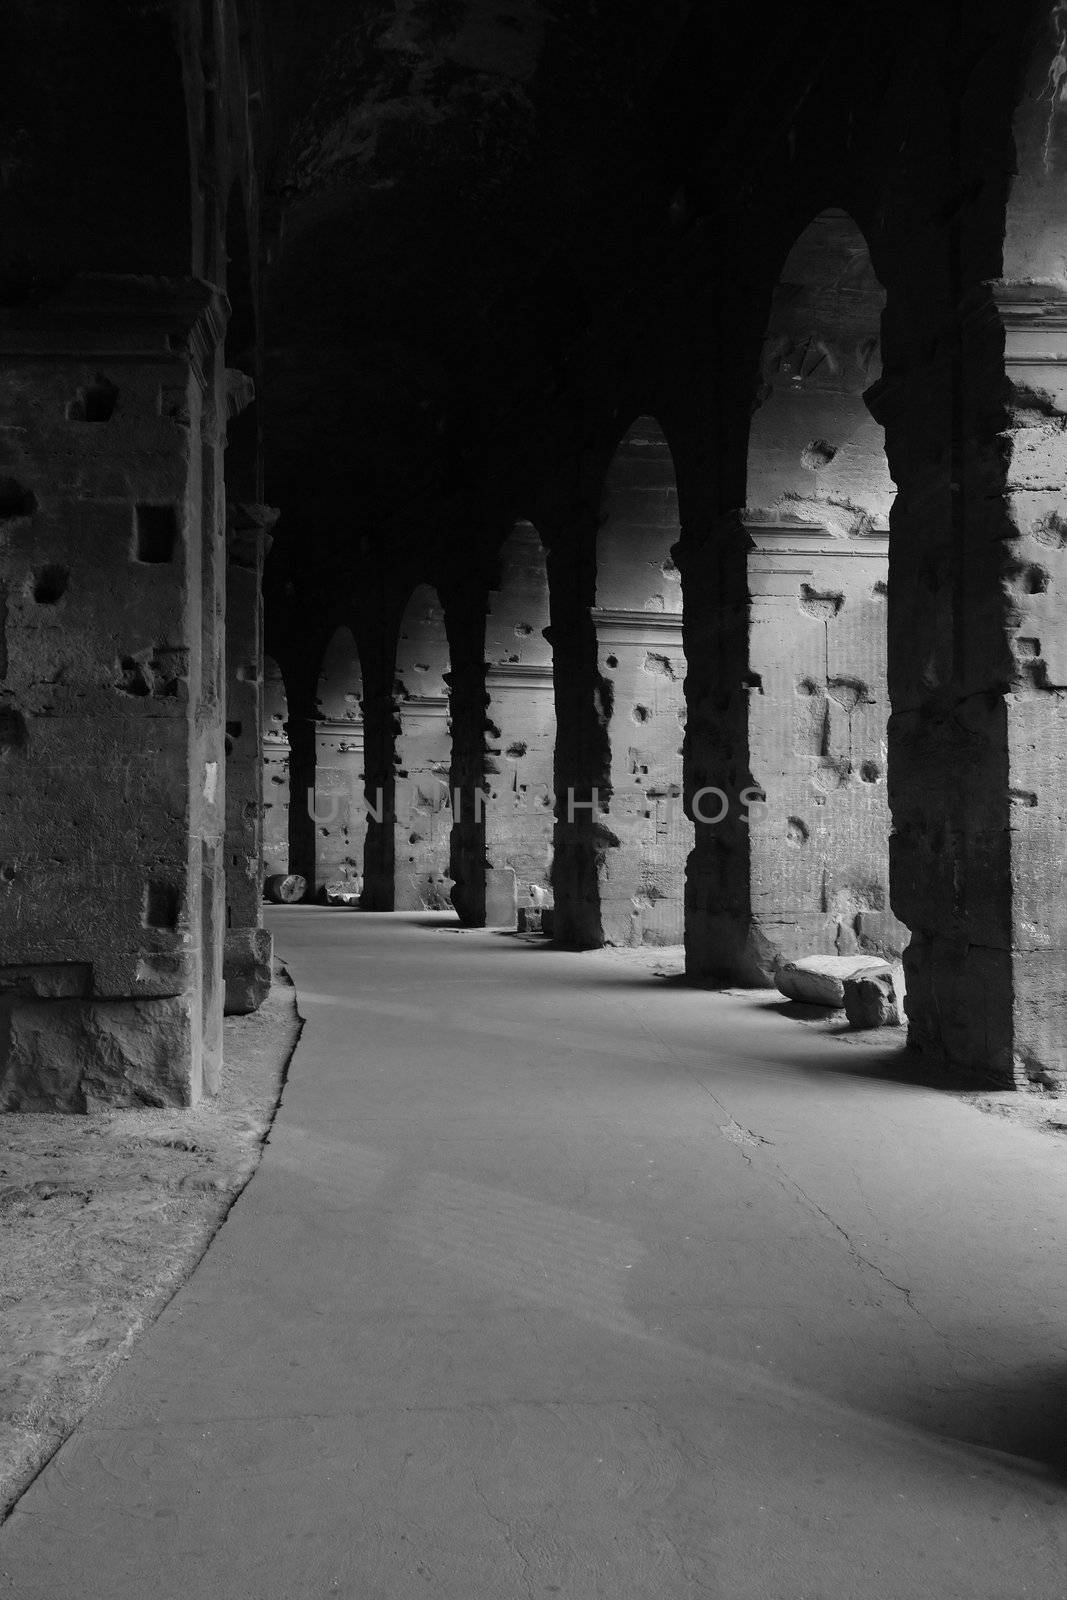 Inside the hallways of the Colosseum in Rome, Italy.
